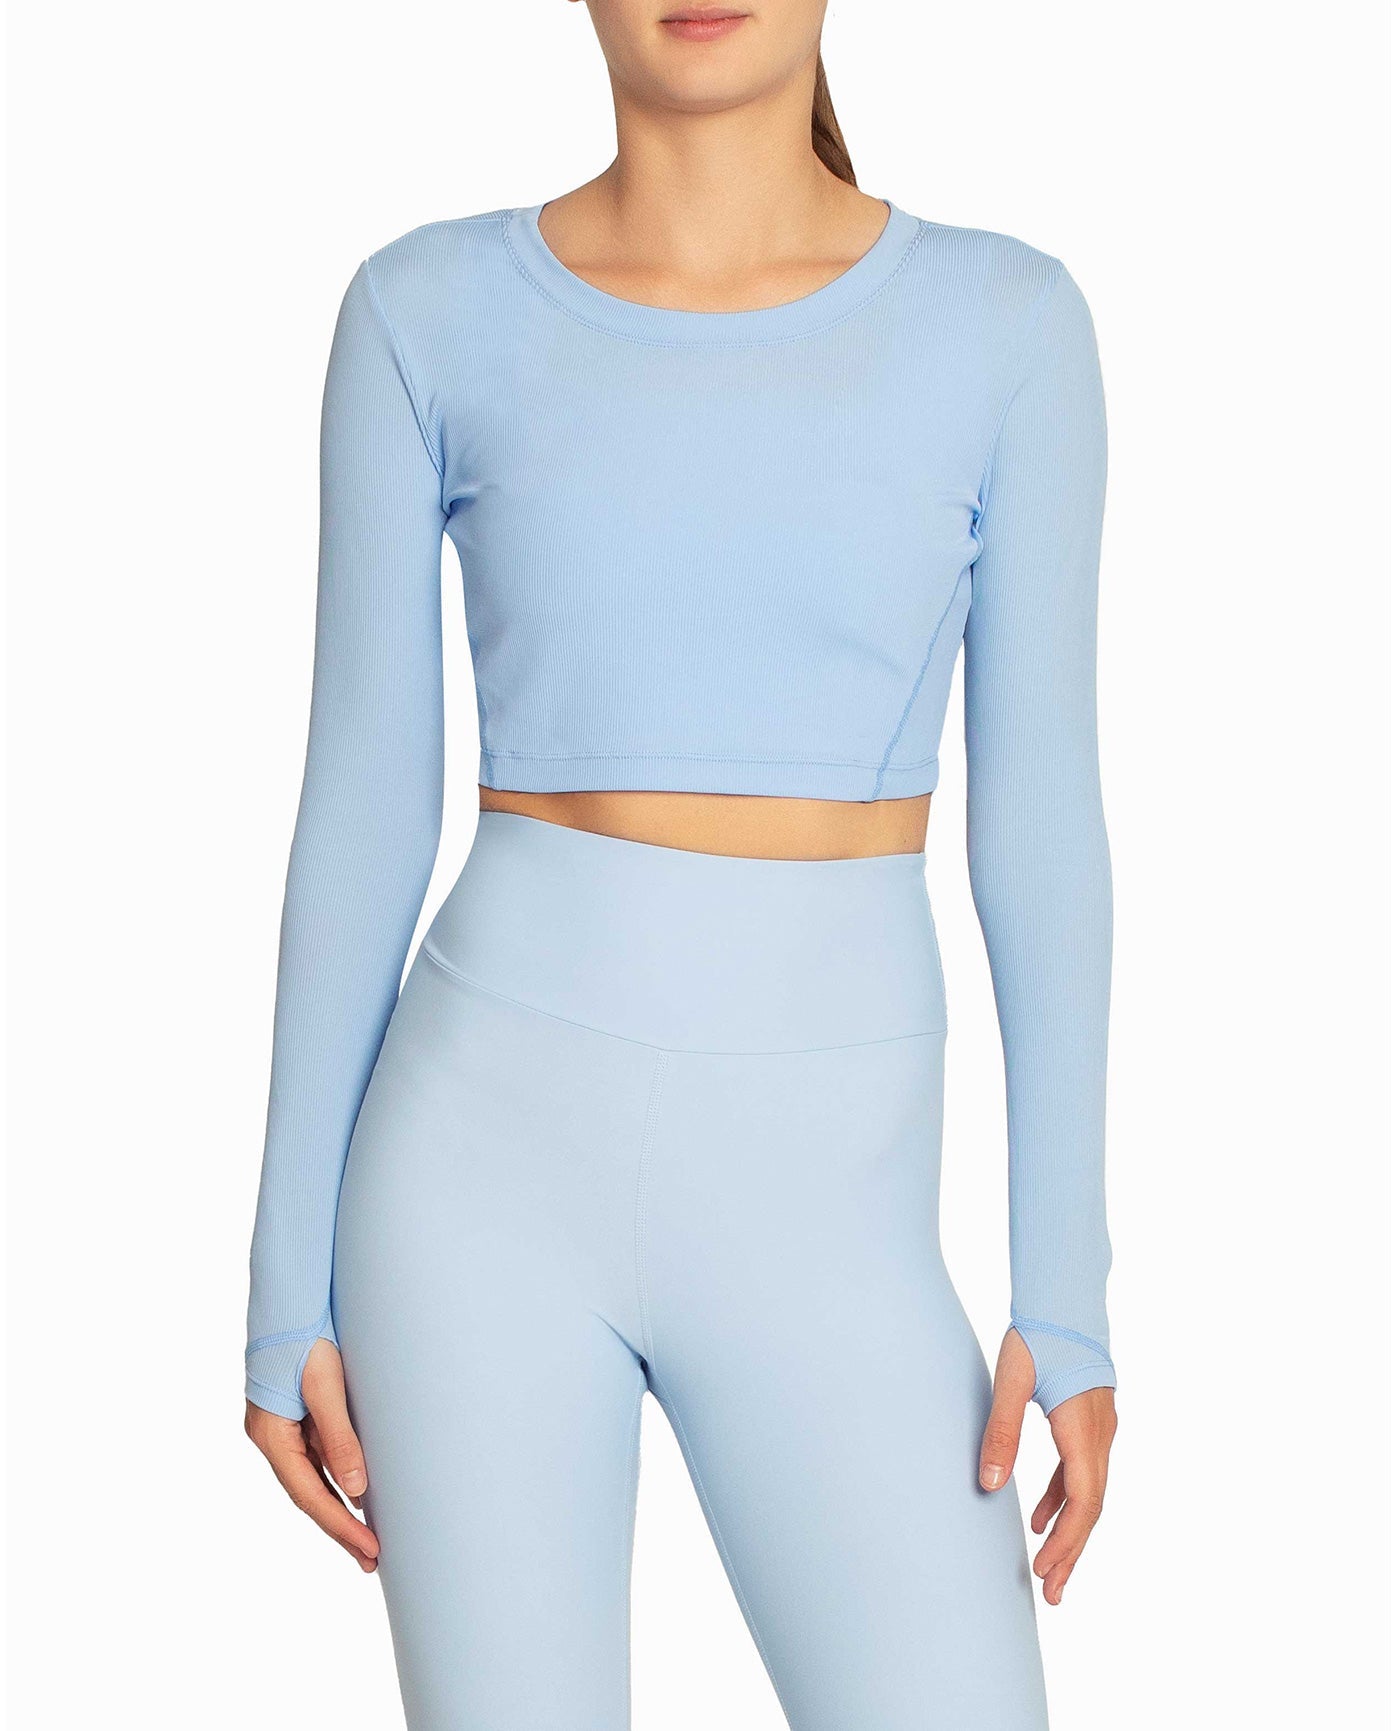 FRONT OF CROPPED ACTIVE LONG SLEEVE TOP | WINDSURFER